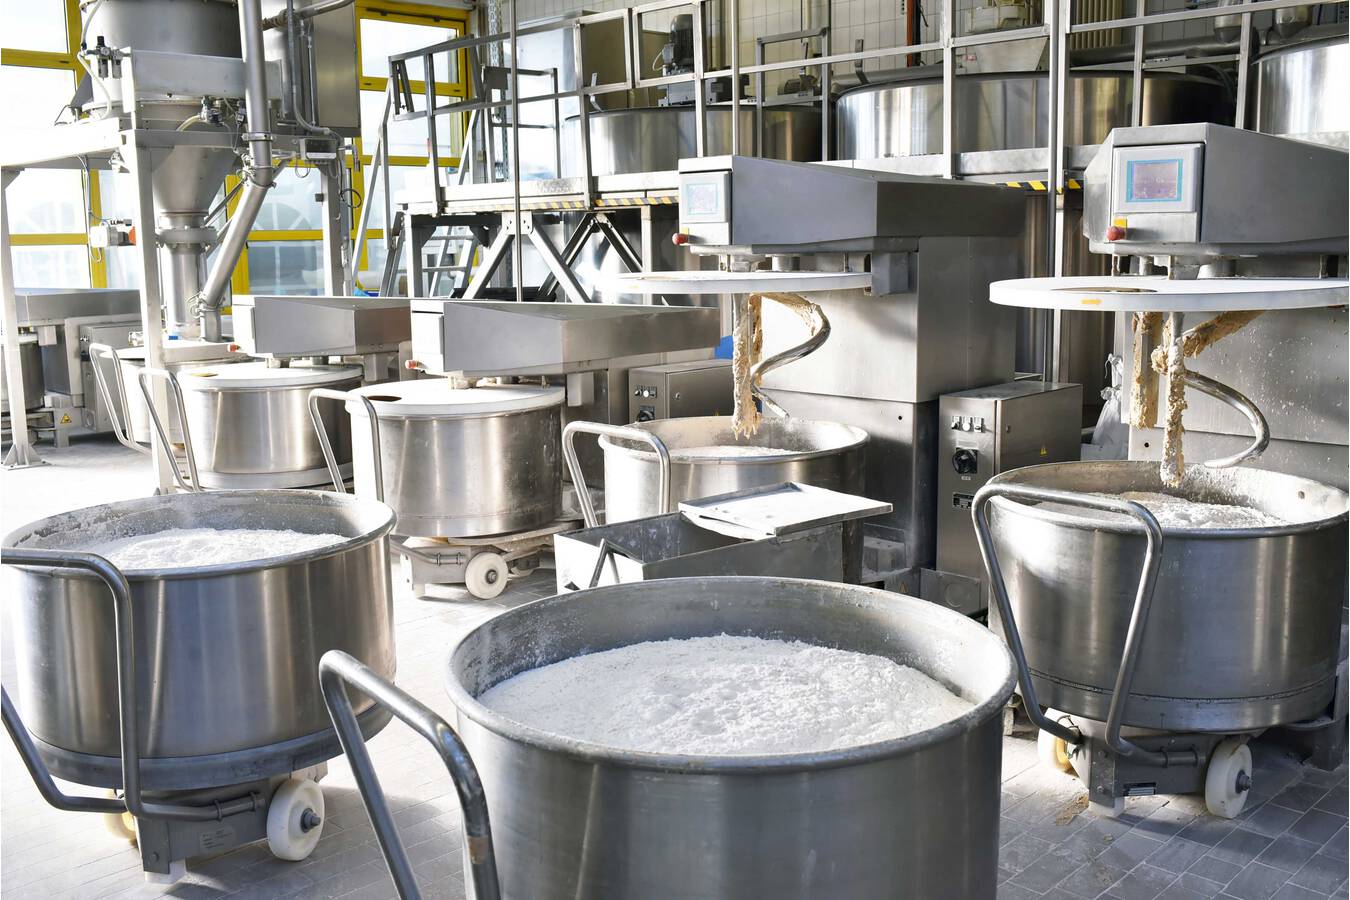 Ensure top-notch reliability with the right drive for the job A varied range suited to food industry requirements – Ideal motors for high standards of hygiene